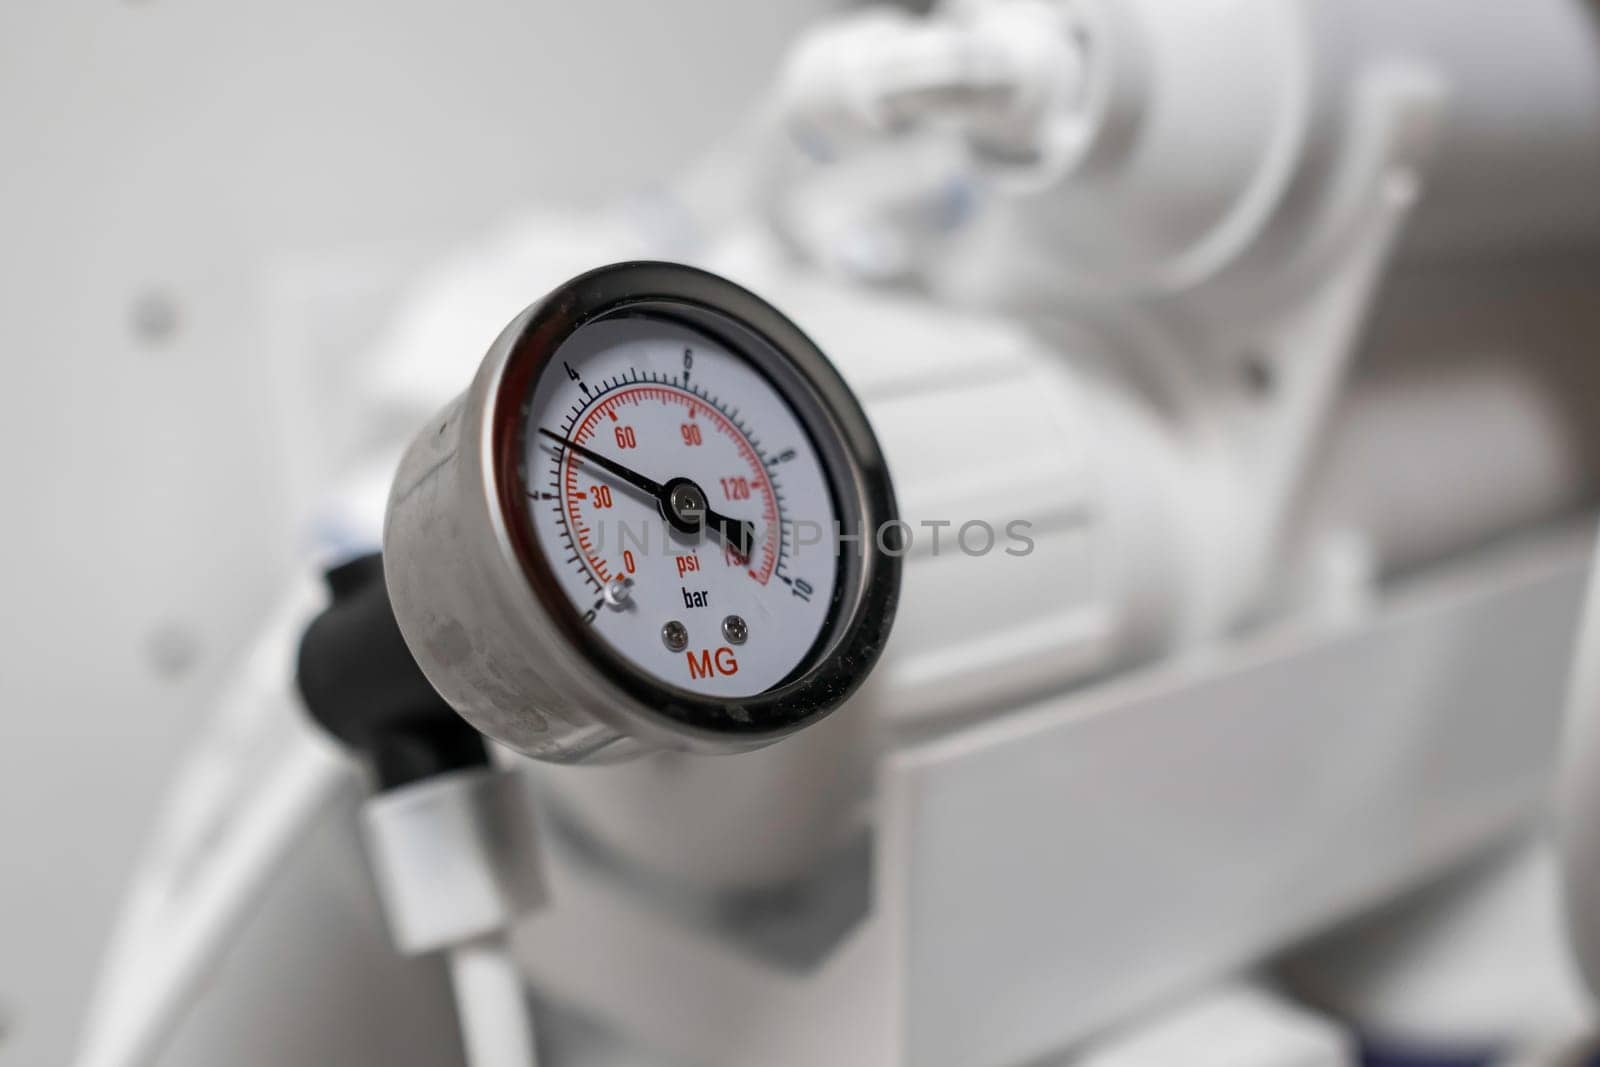 Pressure gauge shows the pressure in the reverse osmosis system by vladimka